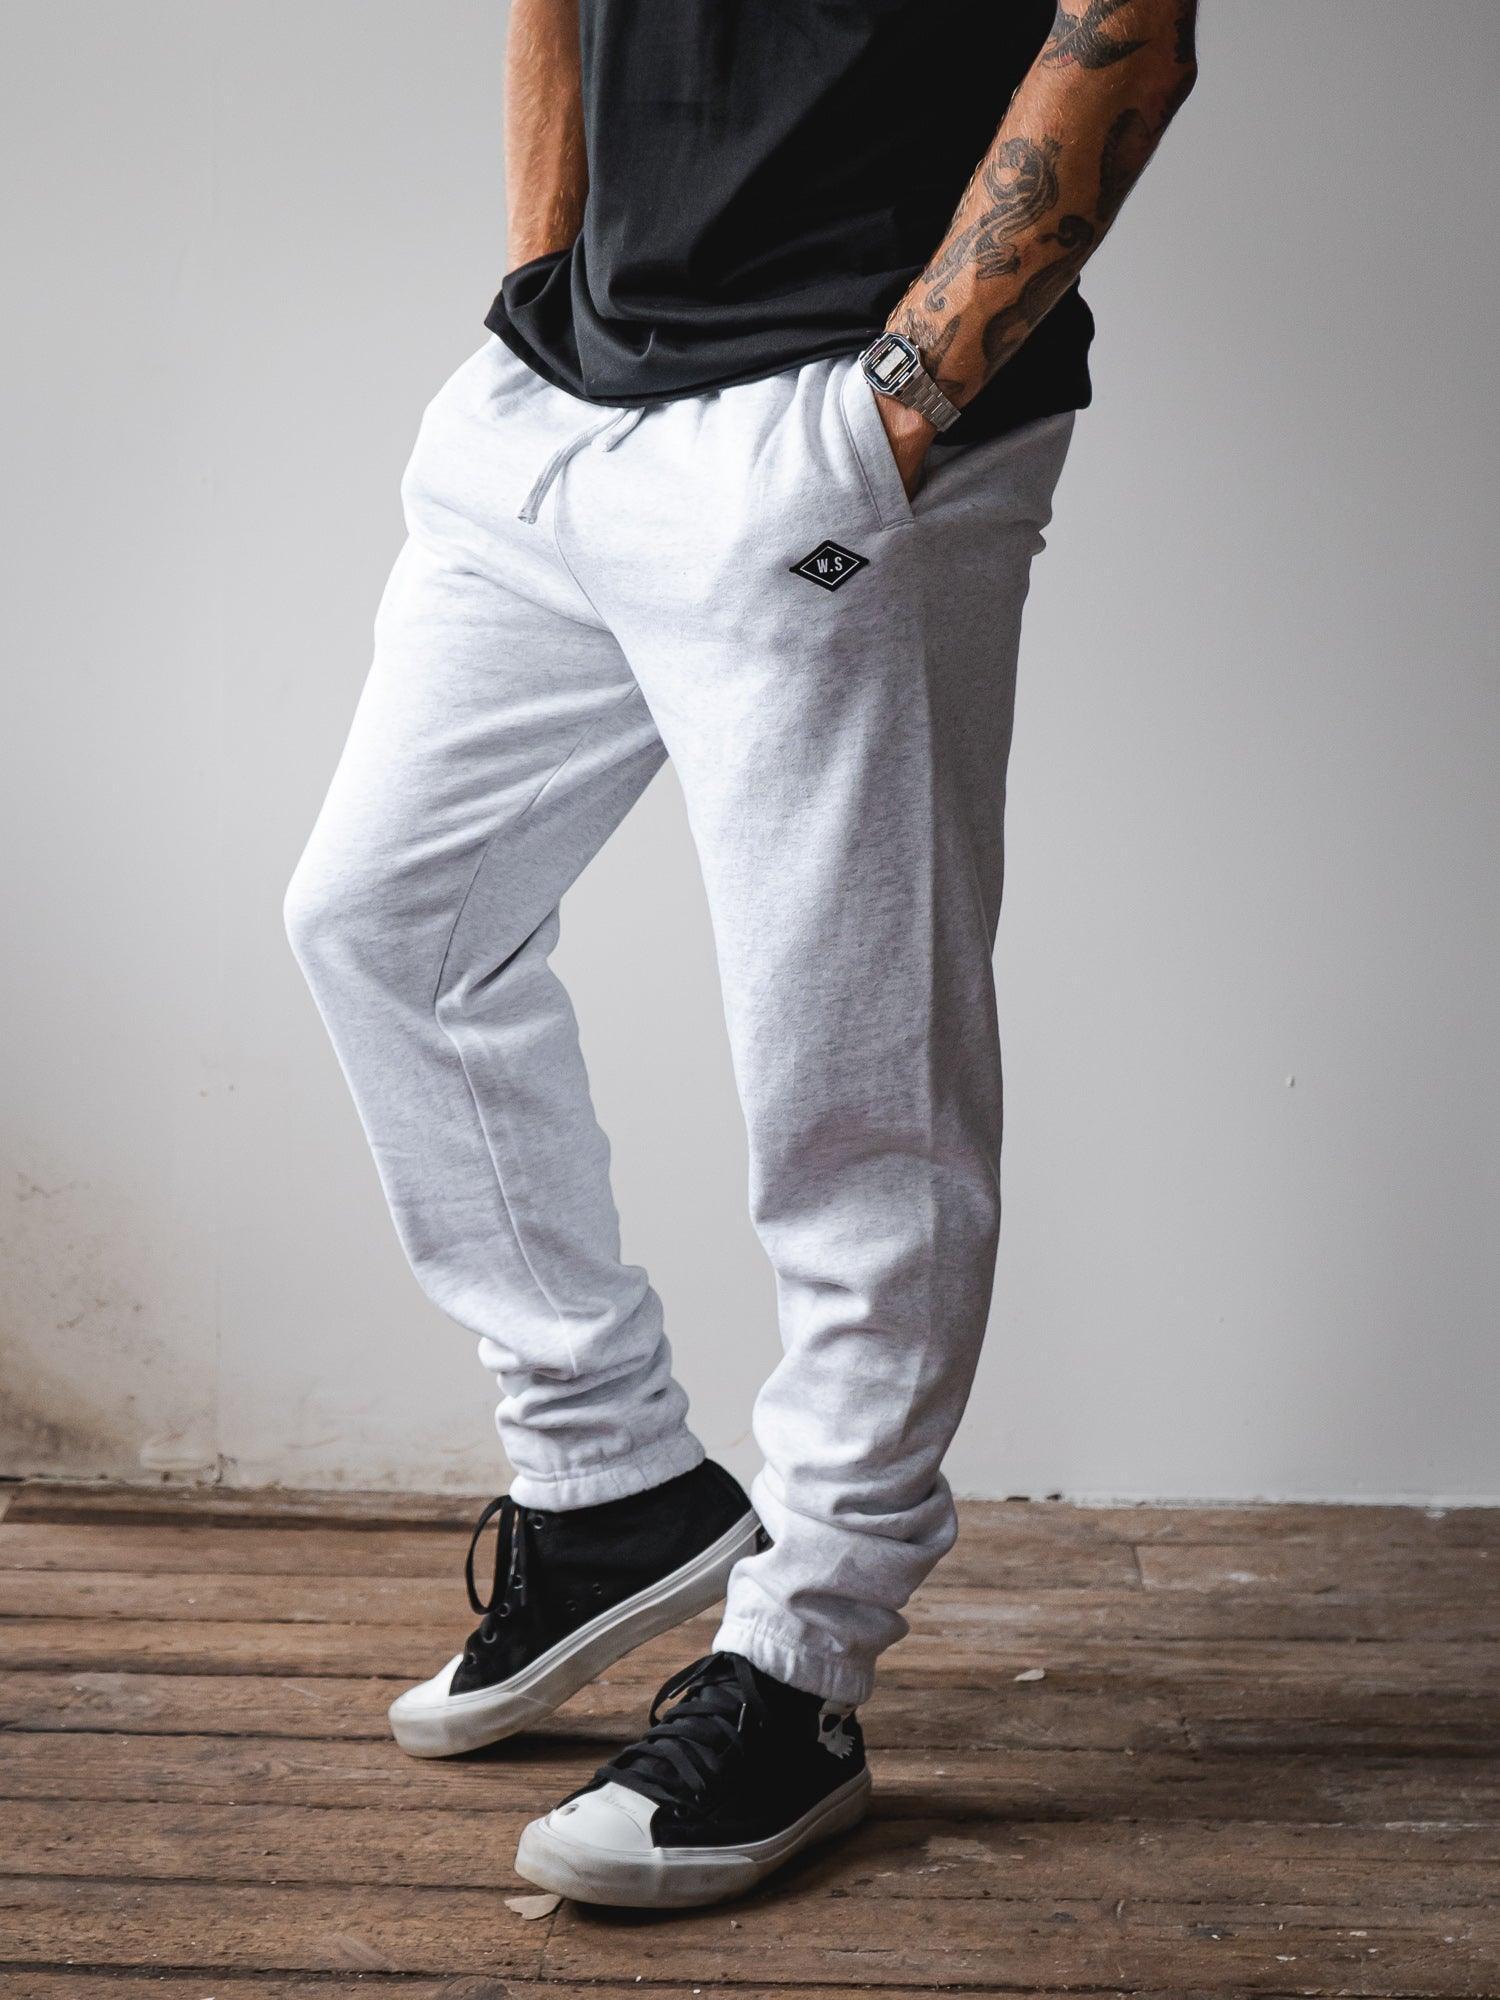 mens classic watershed joggers grey - lightweight super comfy joggers - mens surf fashion